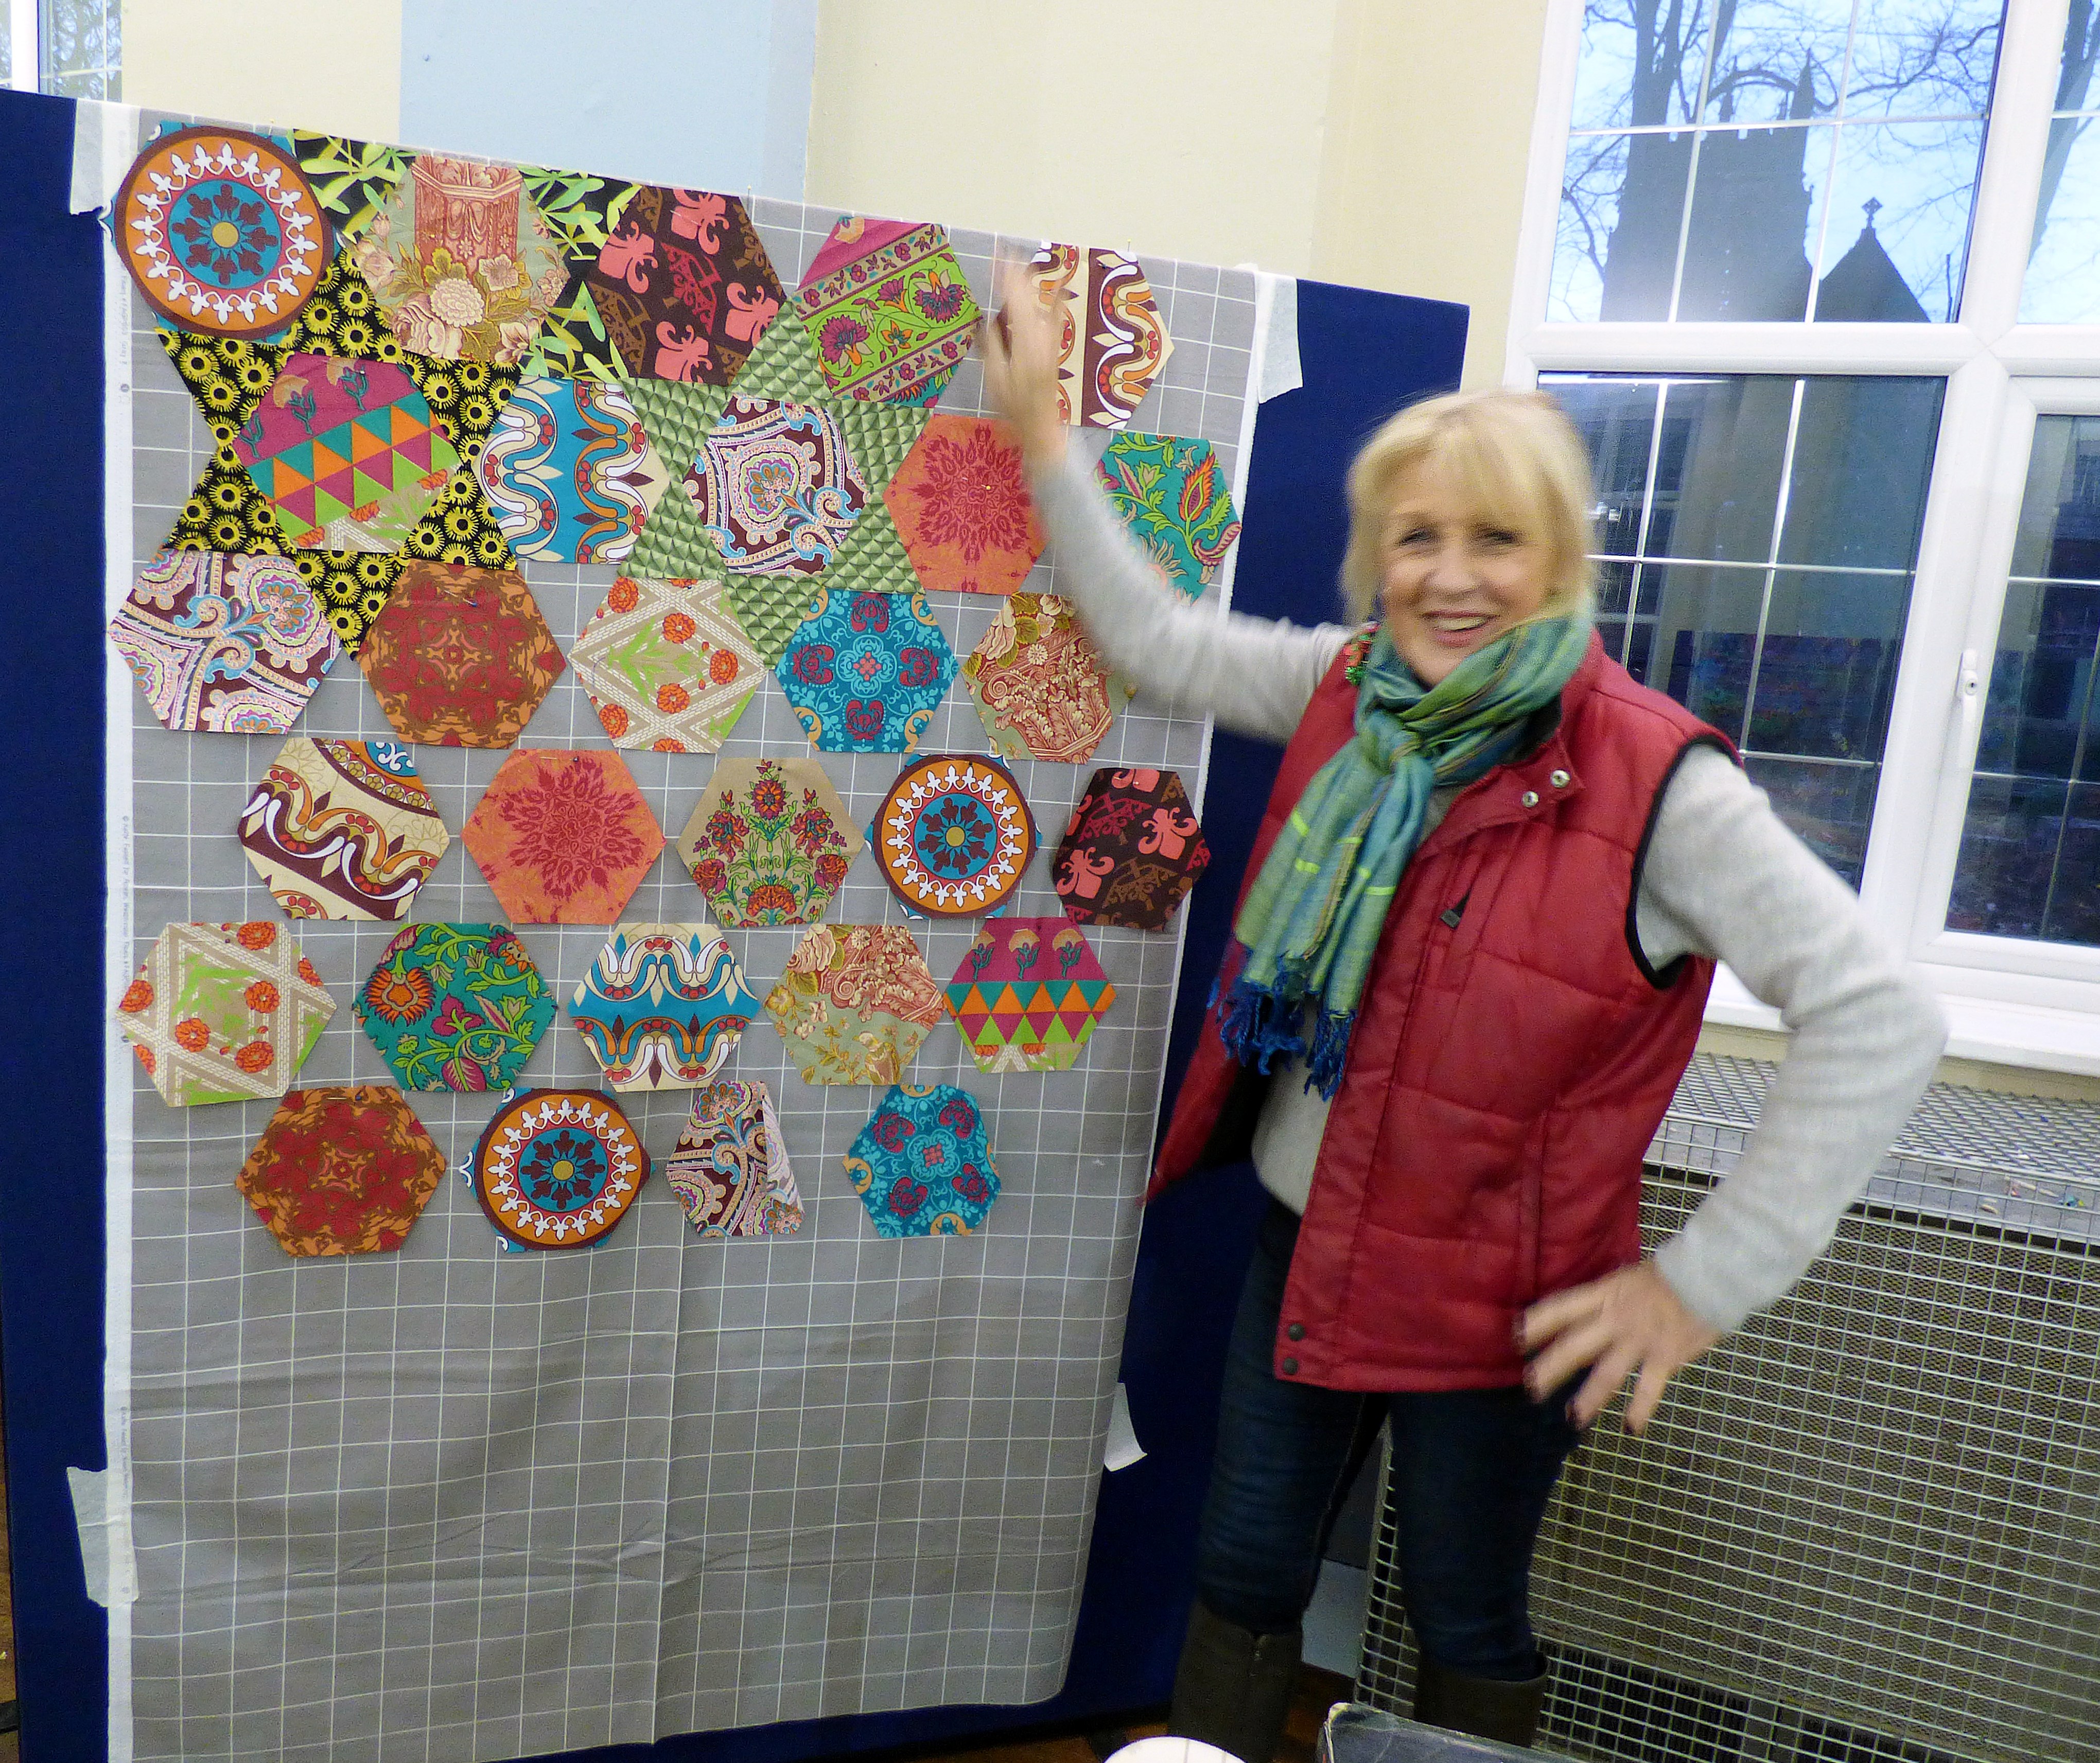 beautiful result at the end of the design workshop- Kaffe Fassett workshop, All Hallows, Dec 2016